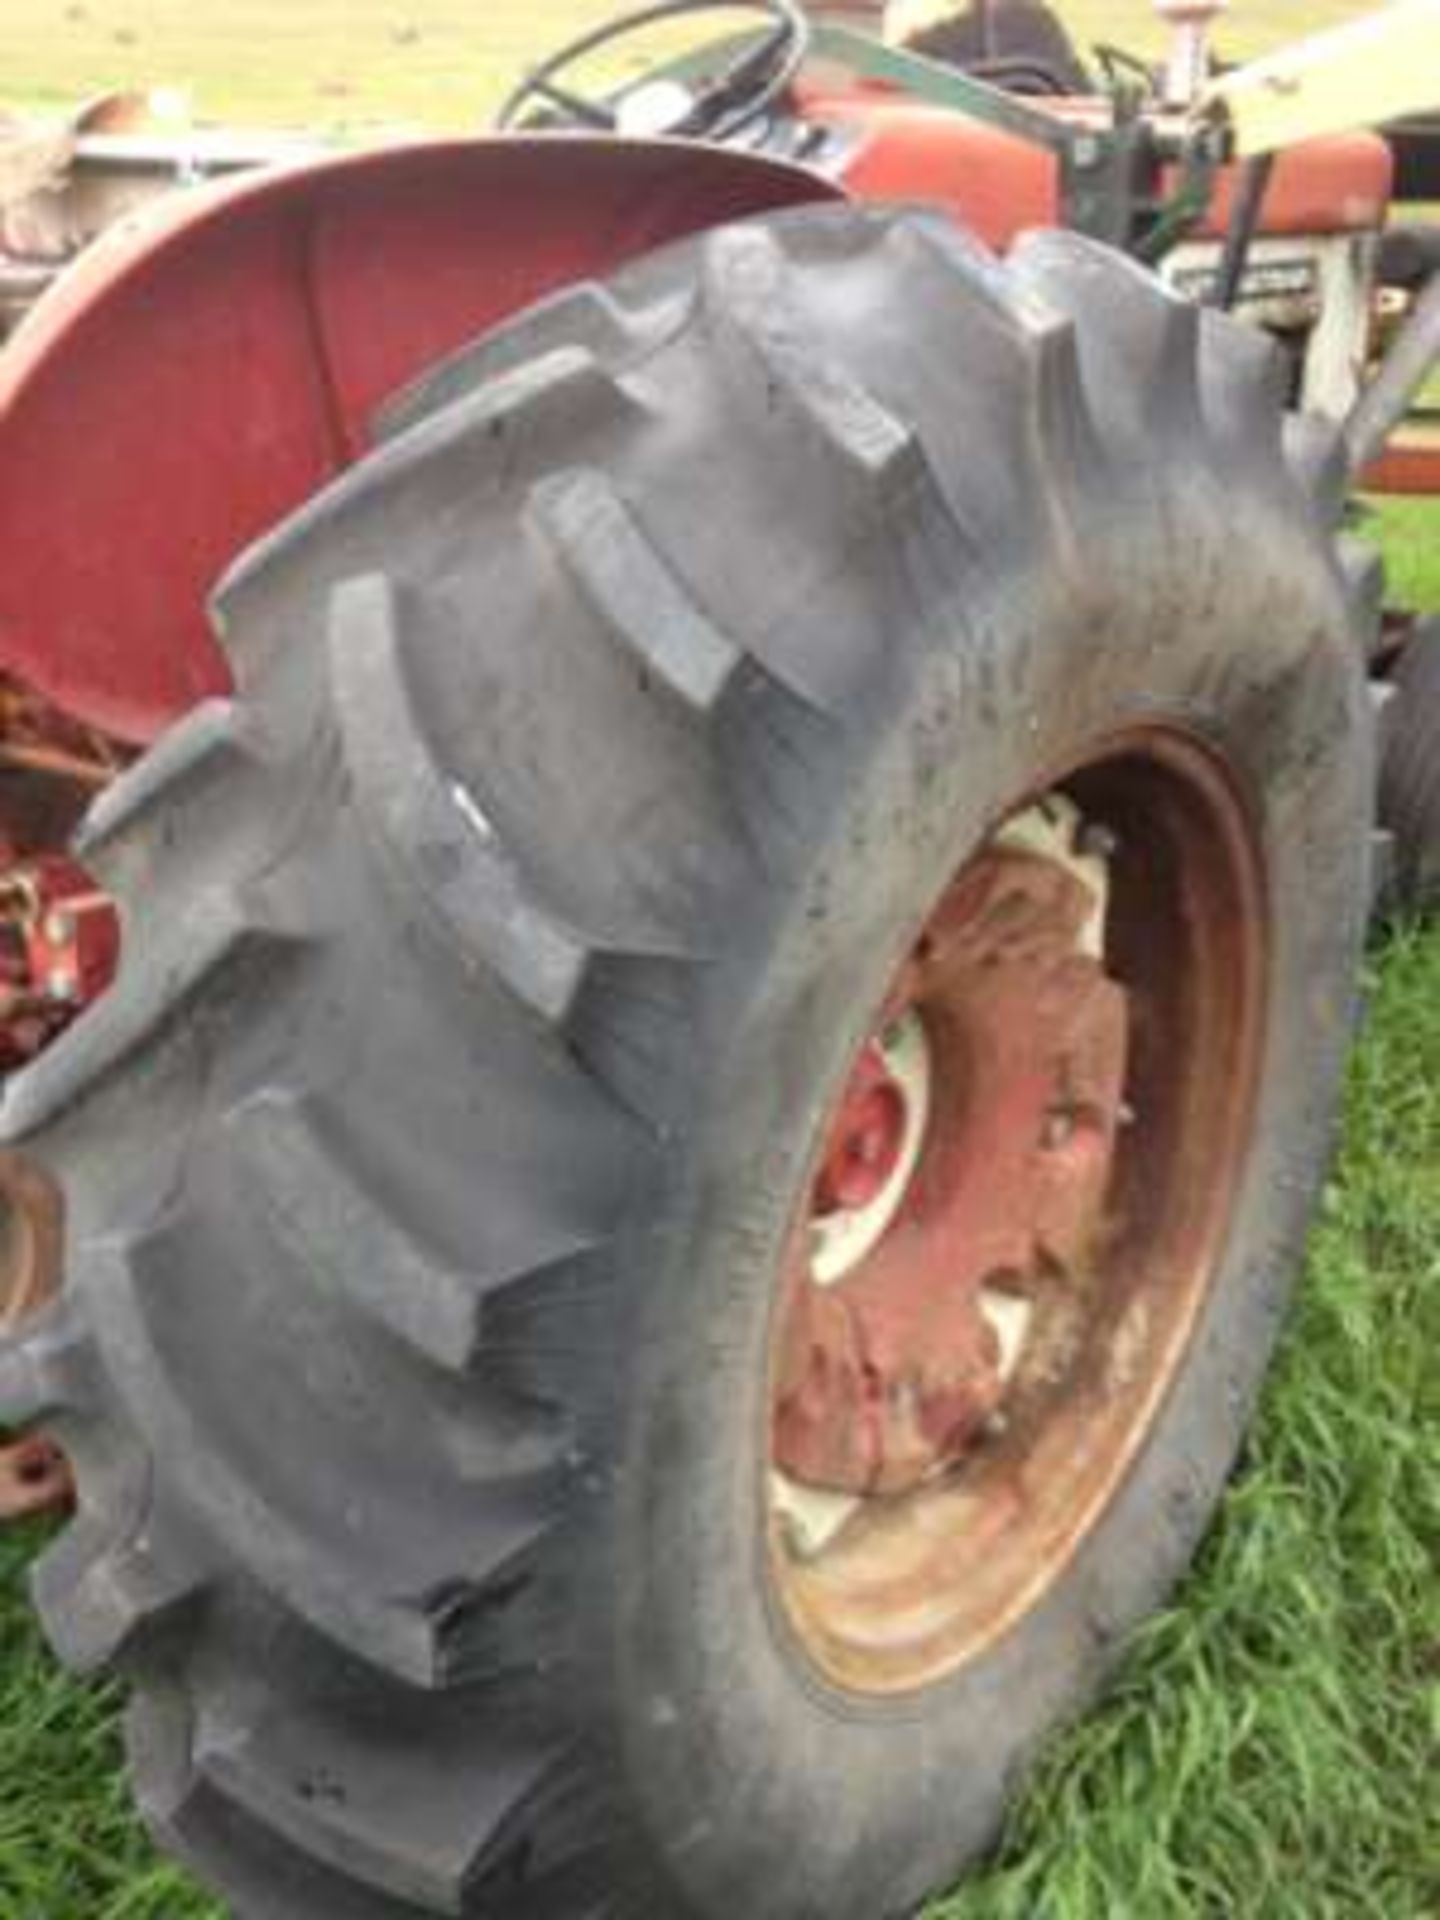 IHC 606 gas tractor, Malco FEL, hyd, exc. rubber (motor issues) - Image 2 of 3